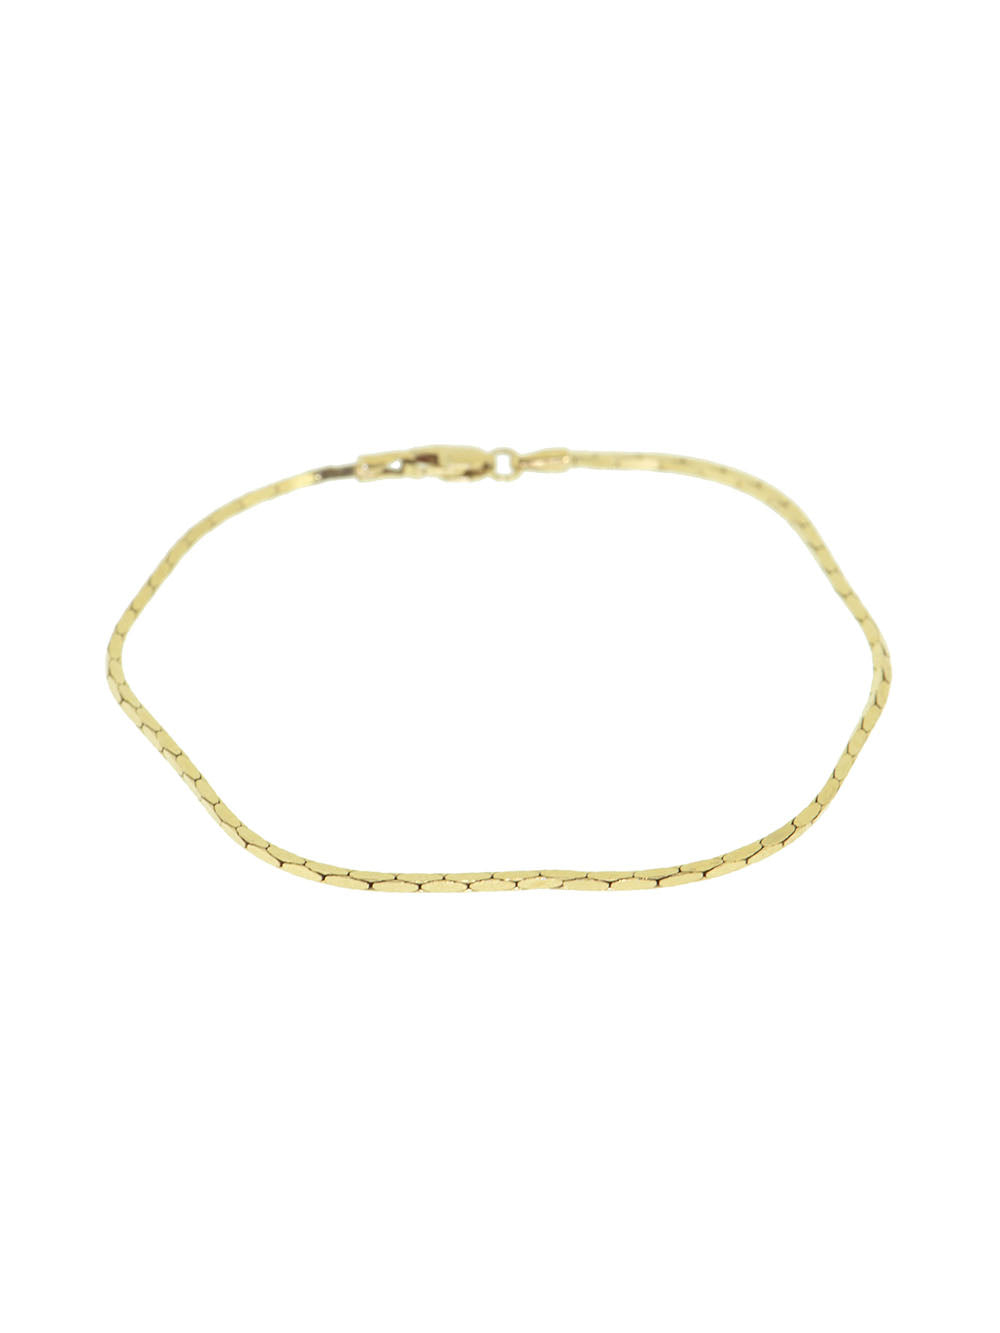 Find me | 14K Gold Plated